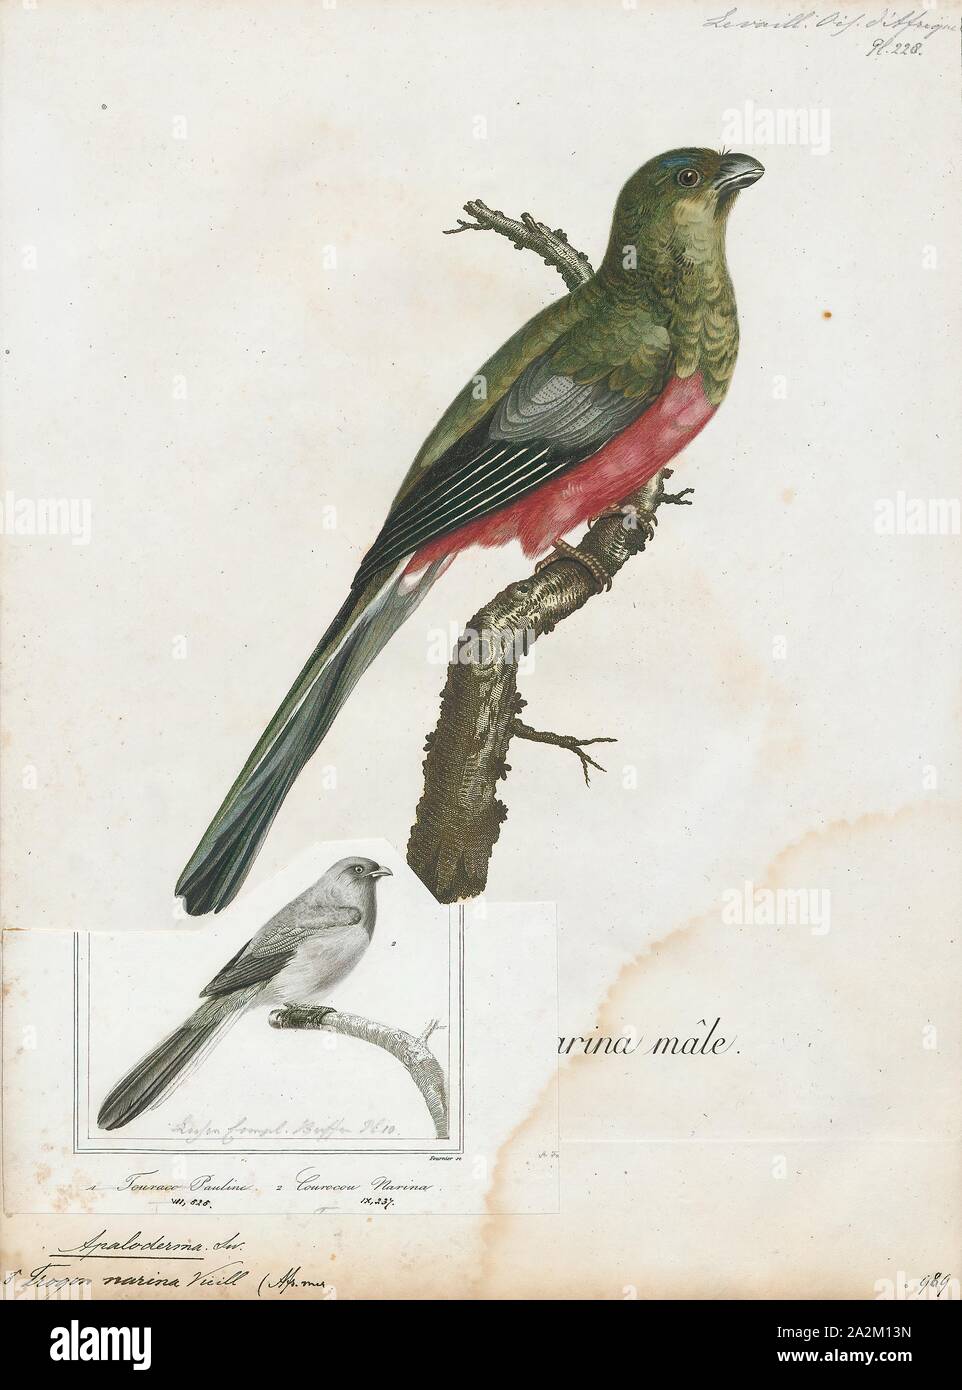 Apaloderma narina, Print, The Narina trogon (Apaloderma narina) is a largely green and red, medium-sized (32–34 cm long), bird of the family Trogonidae. It is native to forests and woodlands of the Afrotropics. Though it is the most widespread and catholic in habitat choice of the three Apaloderma species, their numbers are locally depleted due to deforestation. Some populations are sedentary while others undertake regular movements. The species name commemorates Narina, mistress of French ornithologist François Levaillant, whose name he derived from a Khoikhoi word for "flower Stock Photo